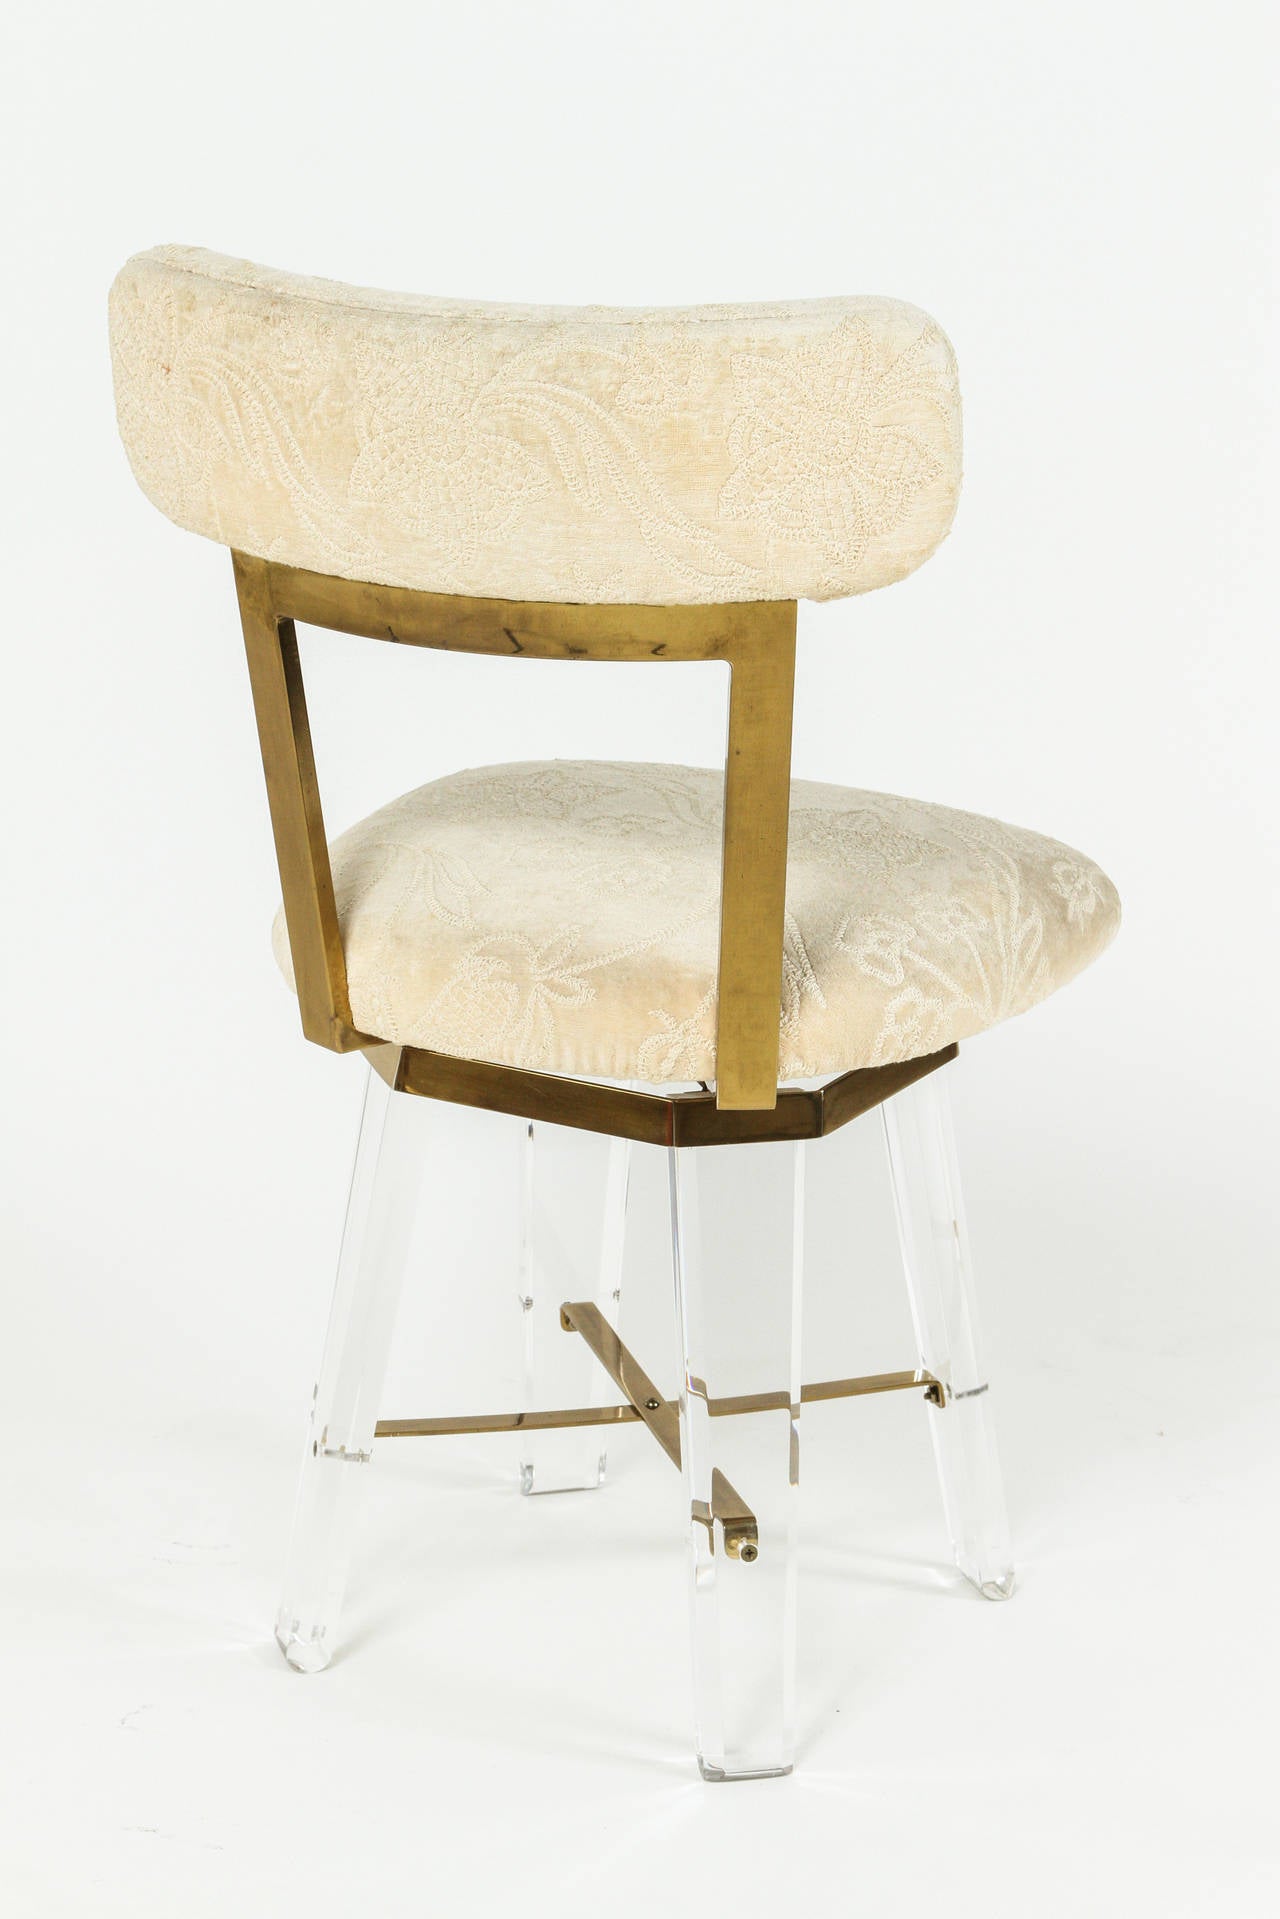 20th Century Elegant Lucite and Brass Swiveling Vanity Chair